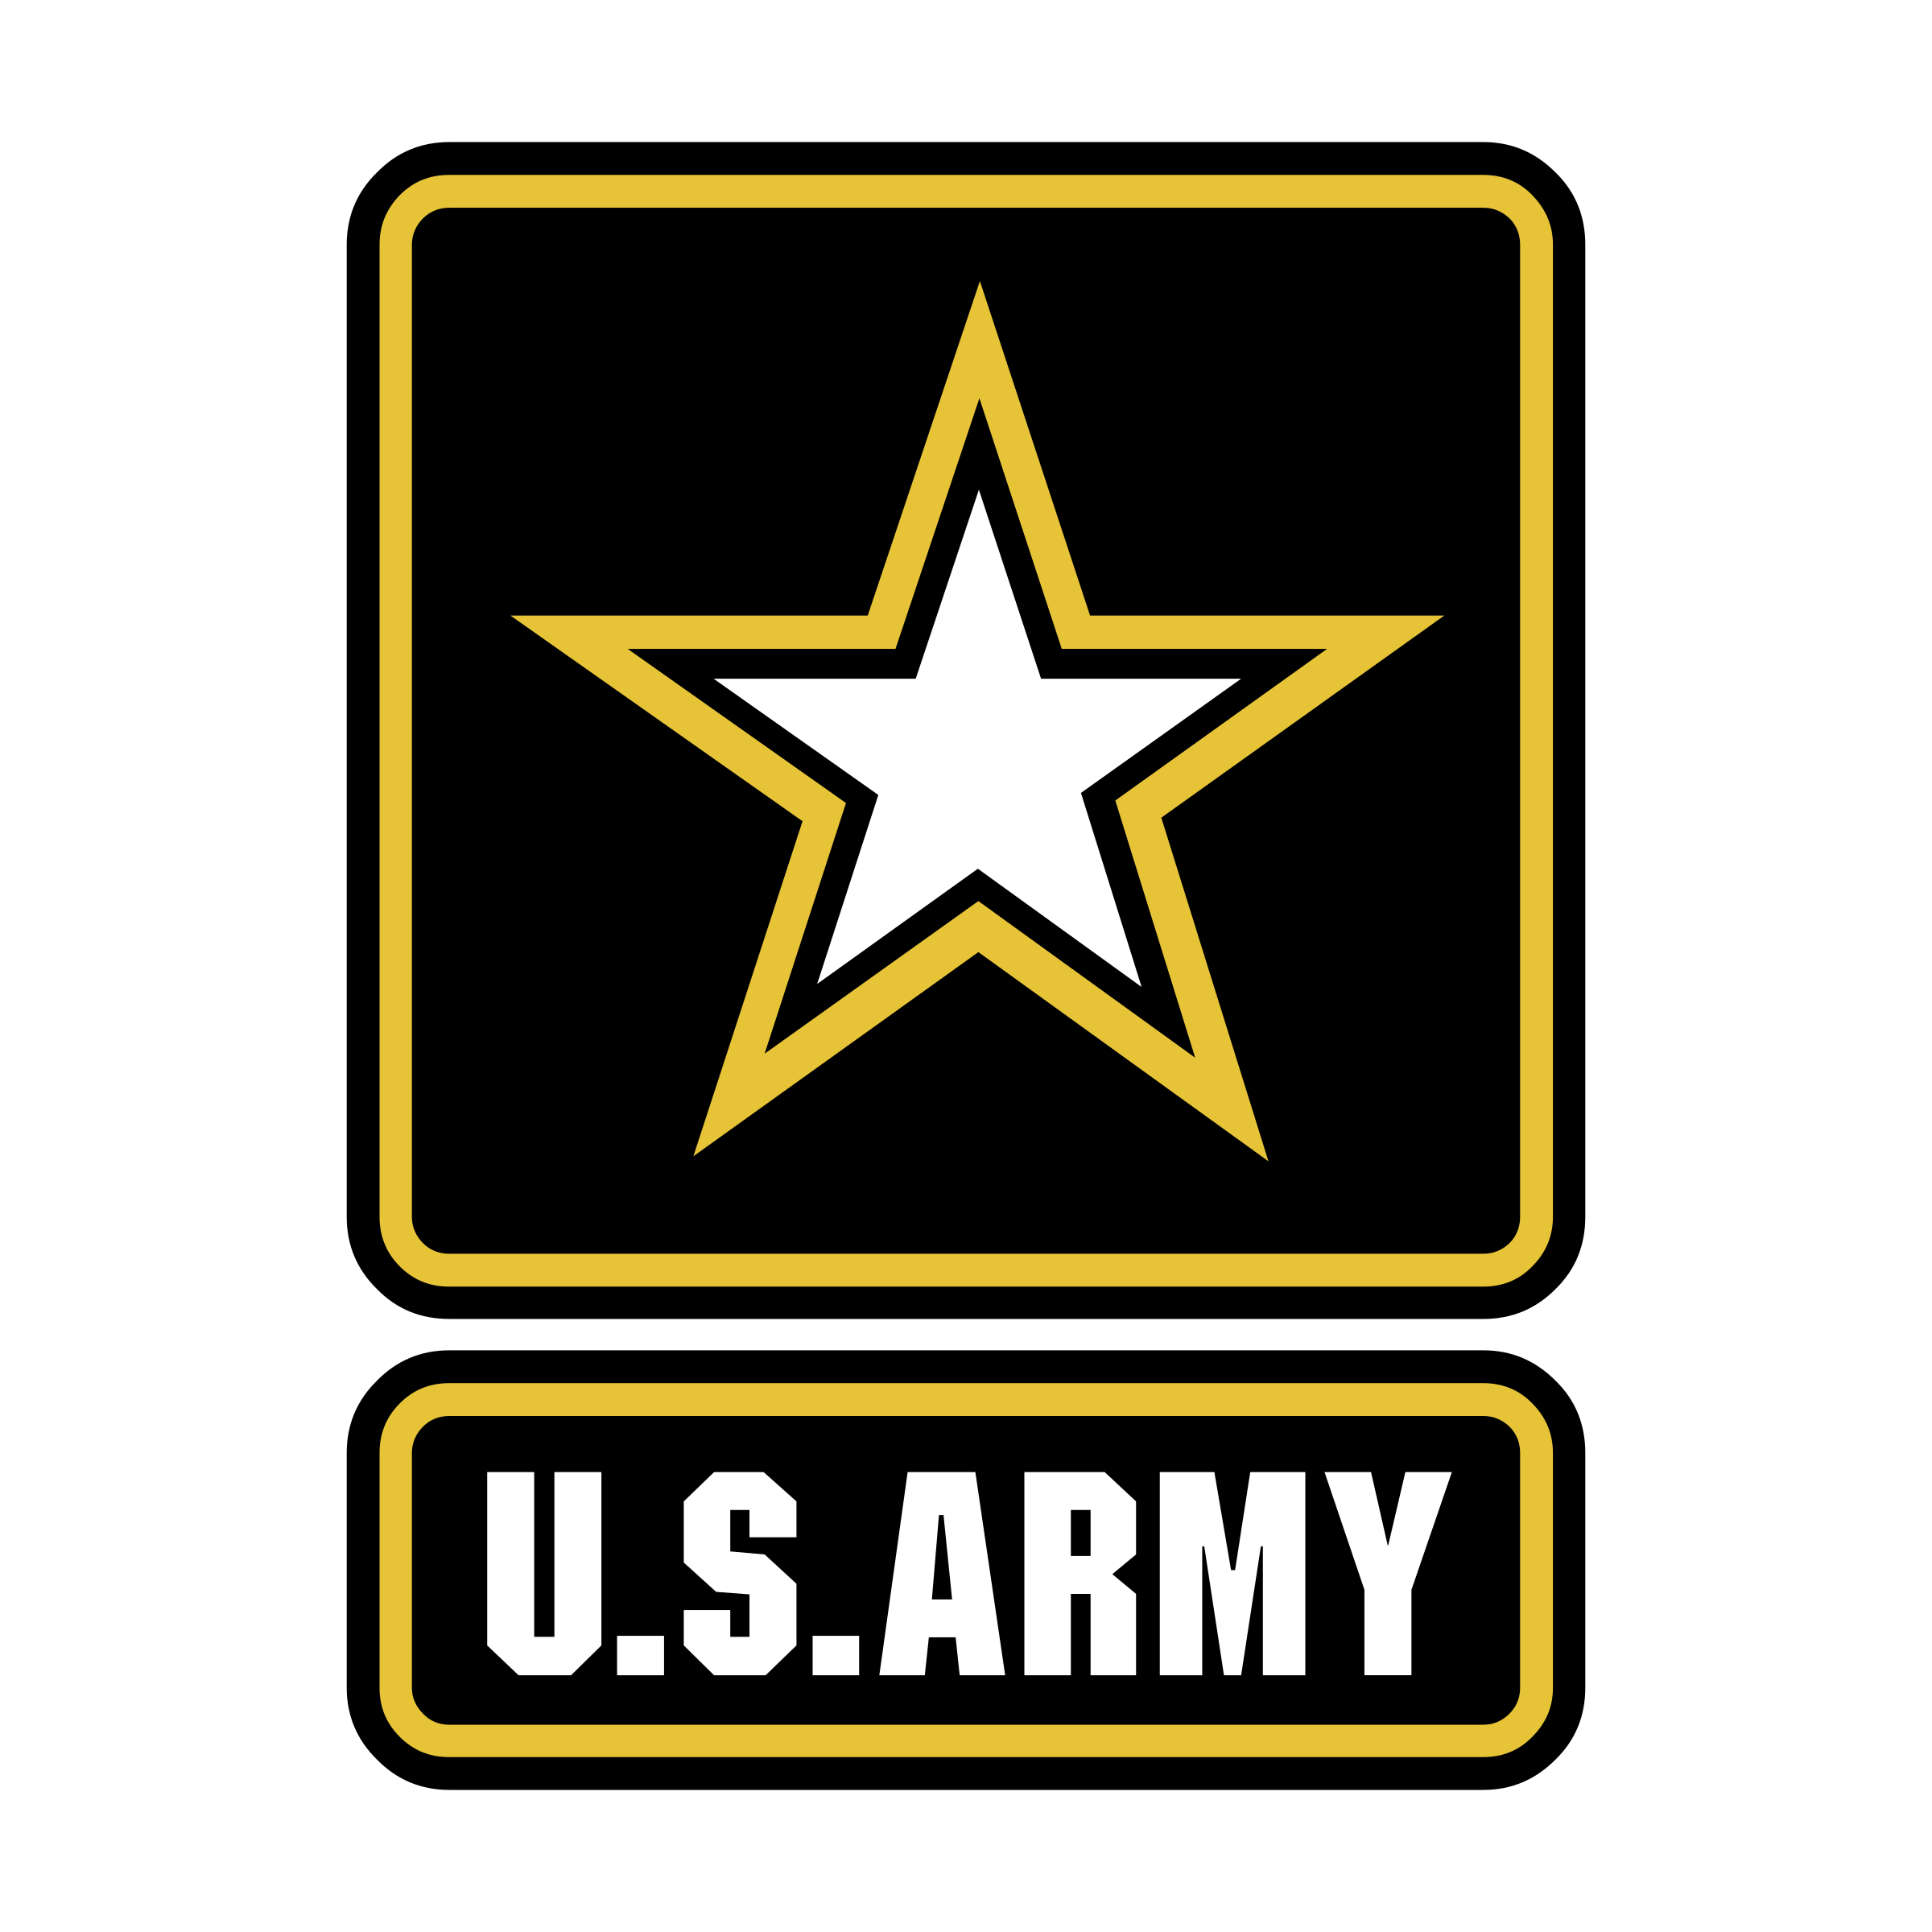 Logo of the US Army